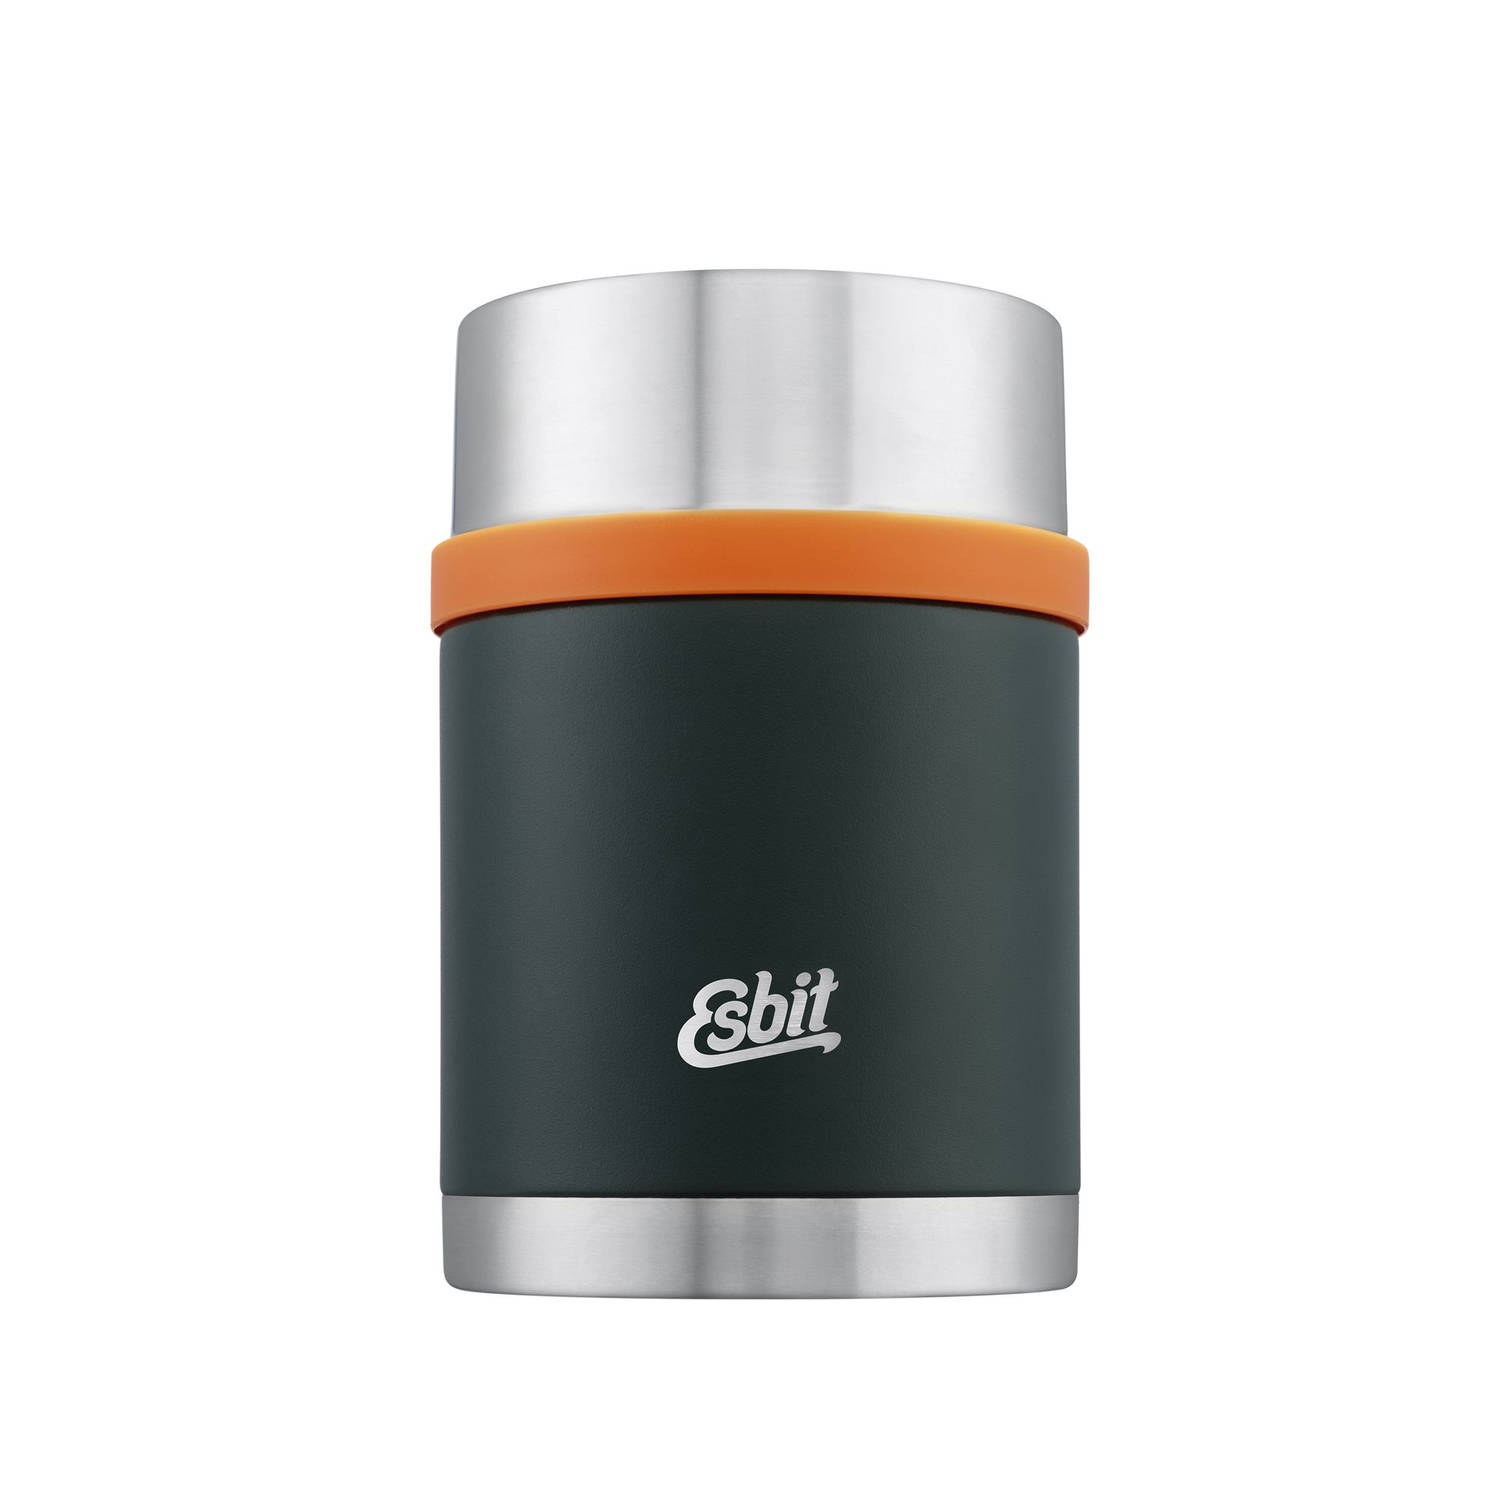 Esbit Sculptor Thermos Voedselcontainer - 750 ml - RVS - Bos Groen